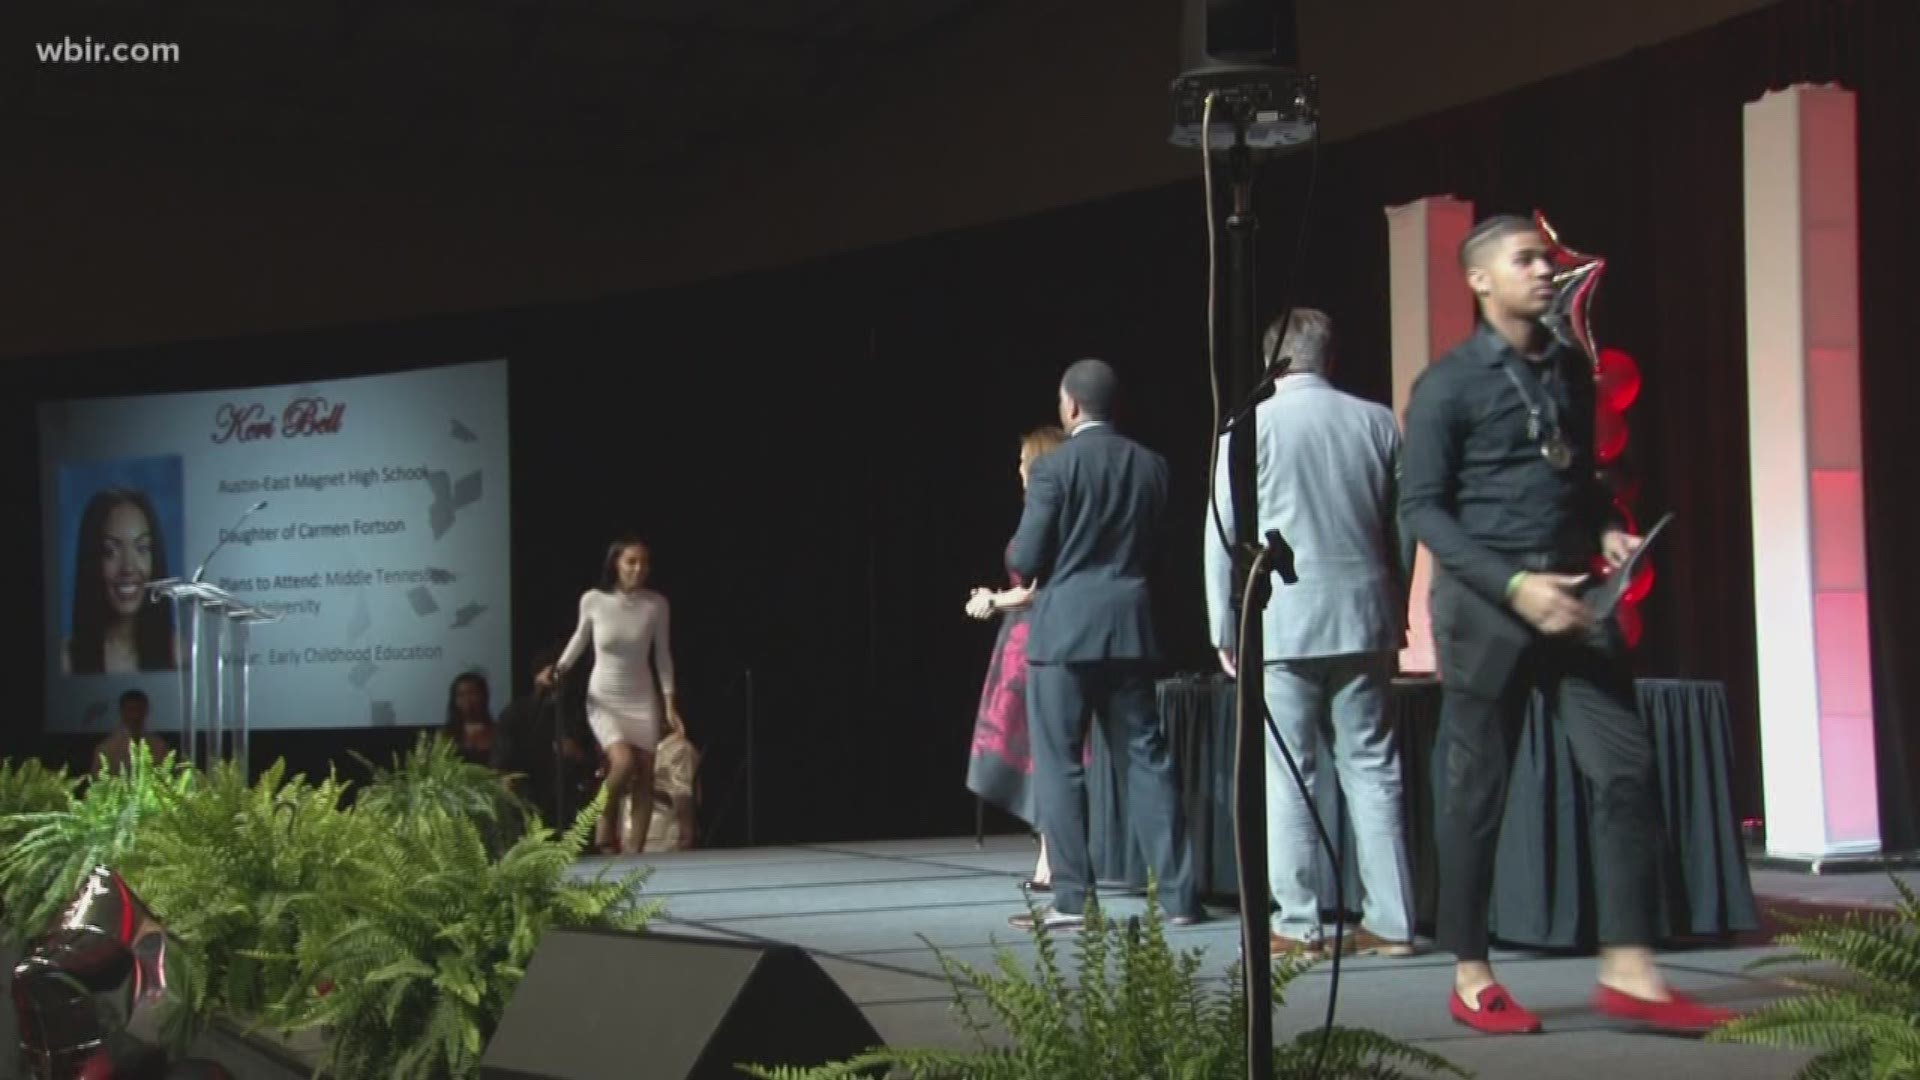 Project GRAD honors nearly 100 local high school students Sunday evening.